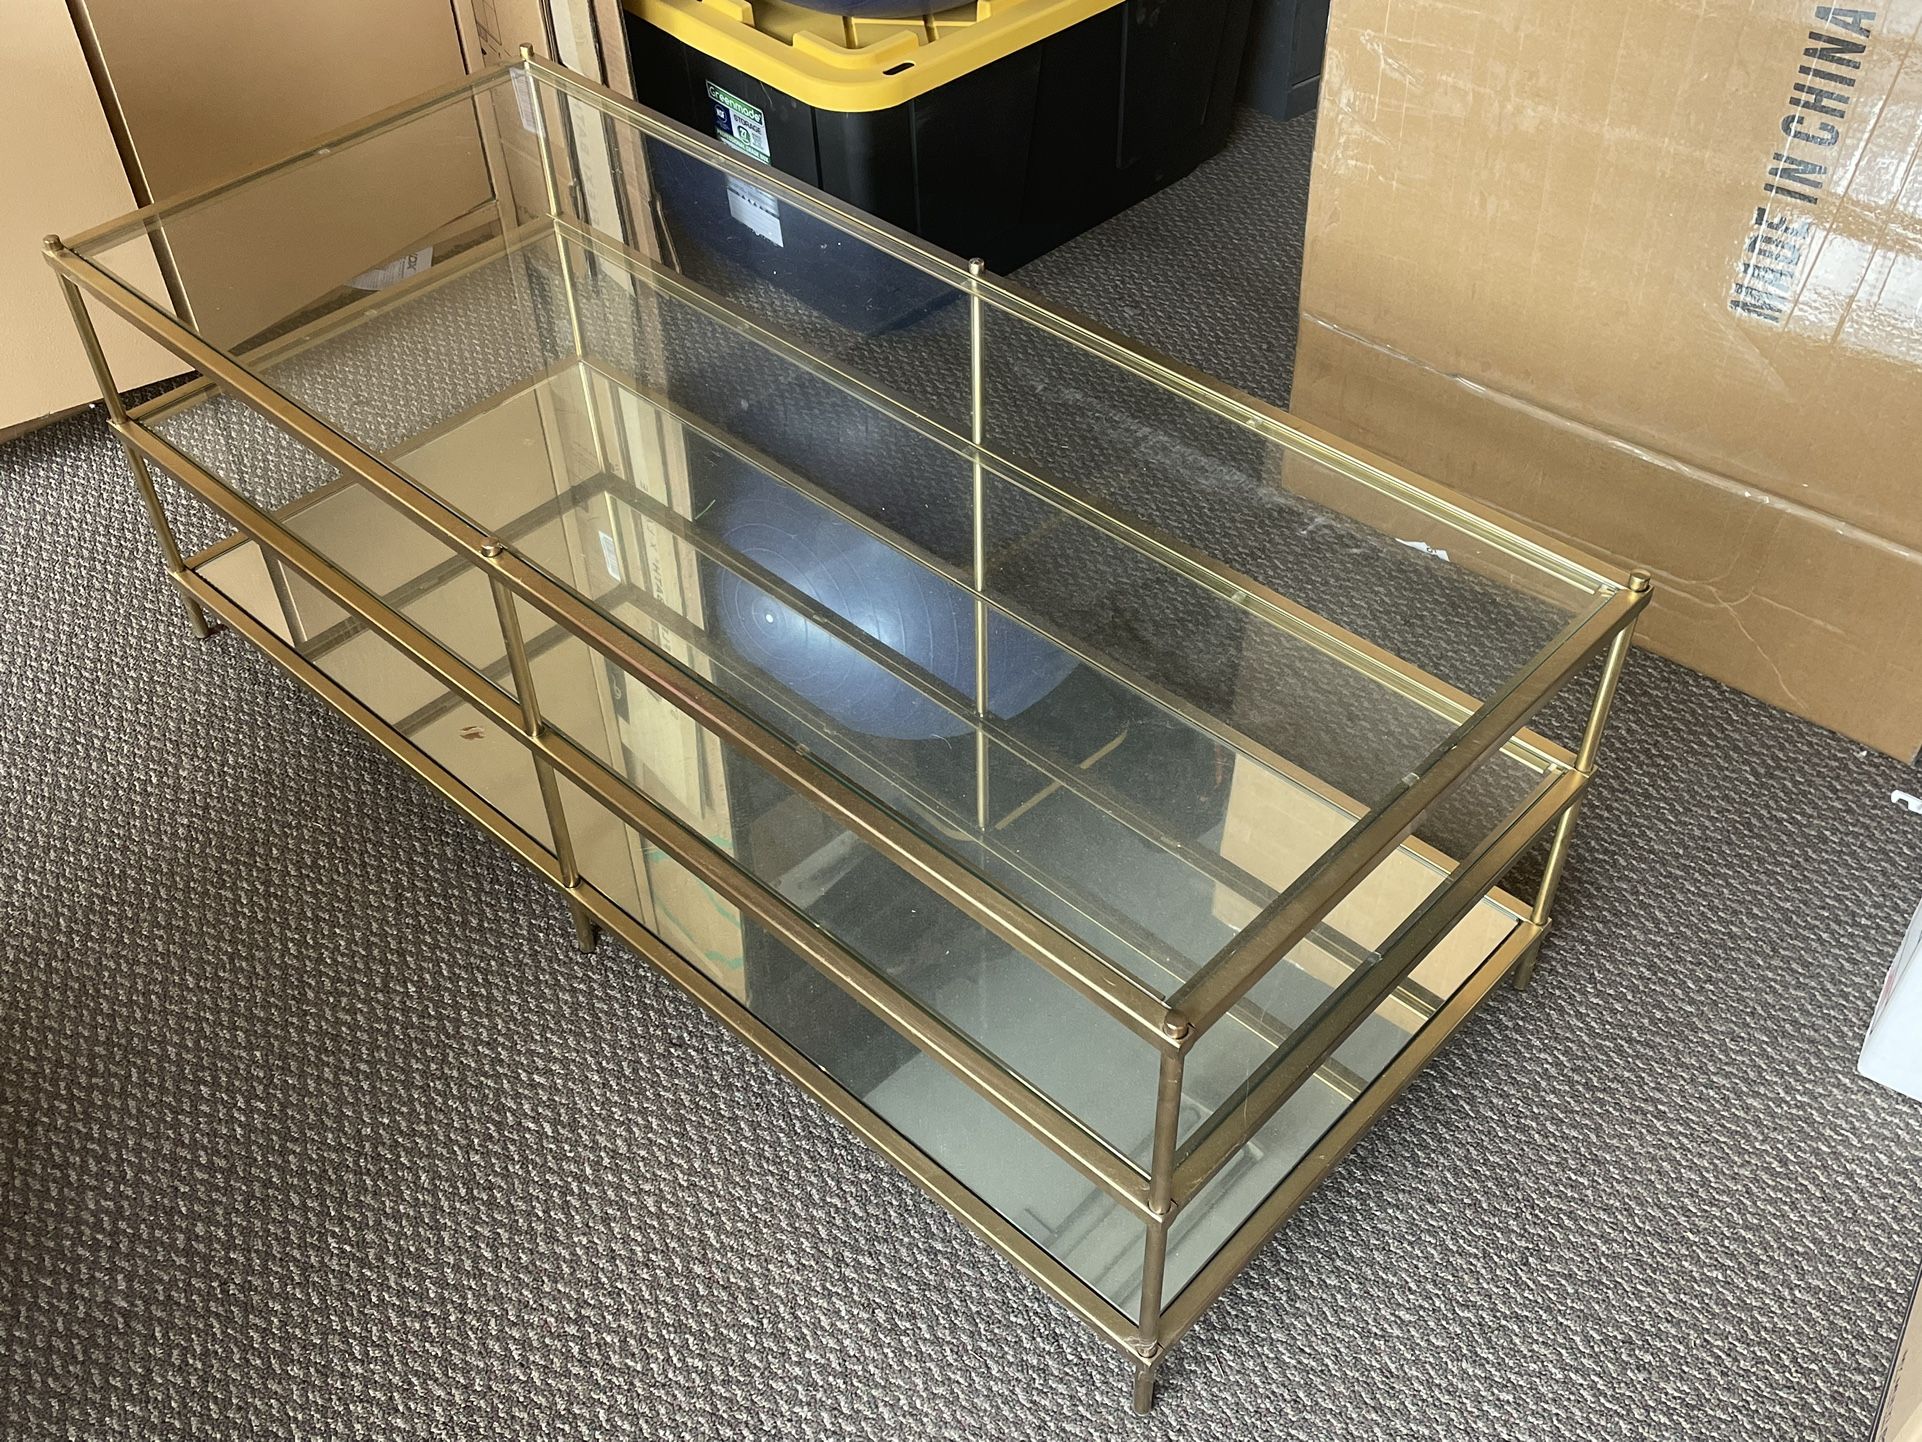 West Elm - Middle century - coffee table - brass & mirror